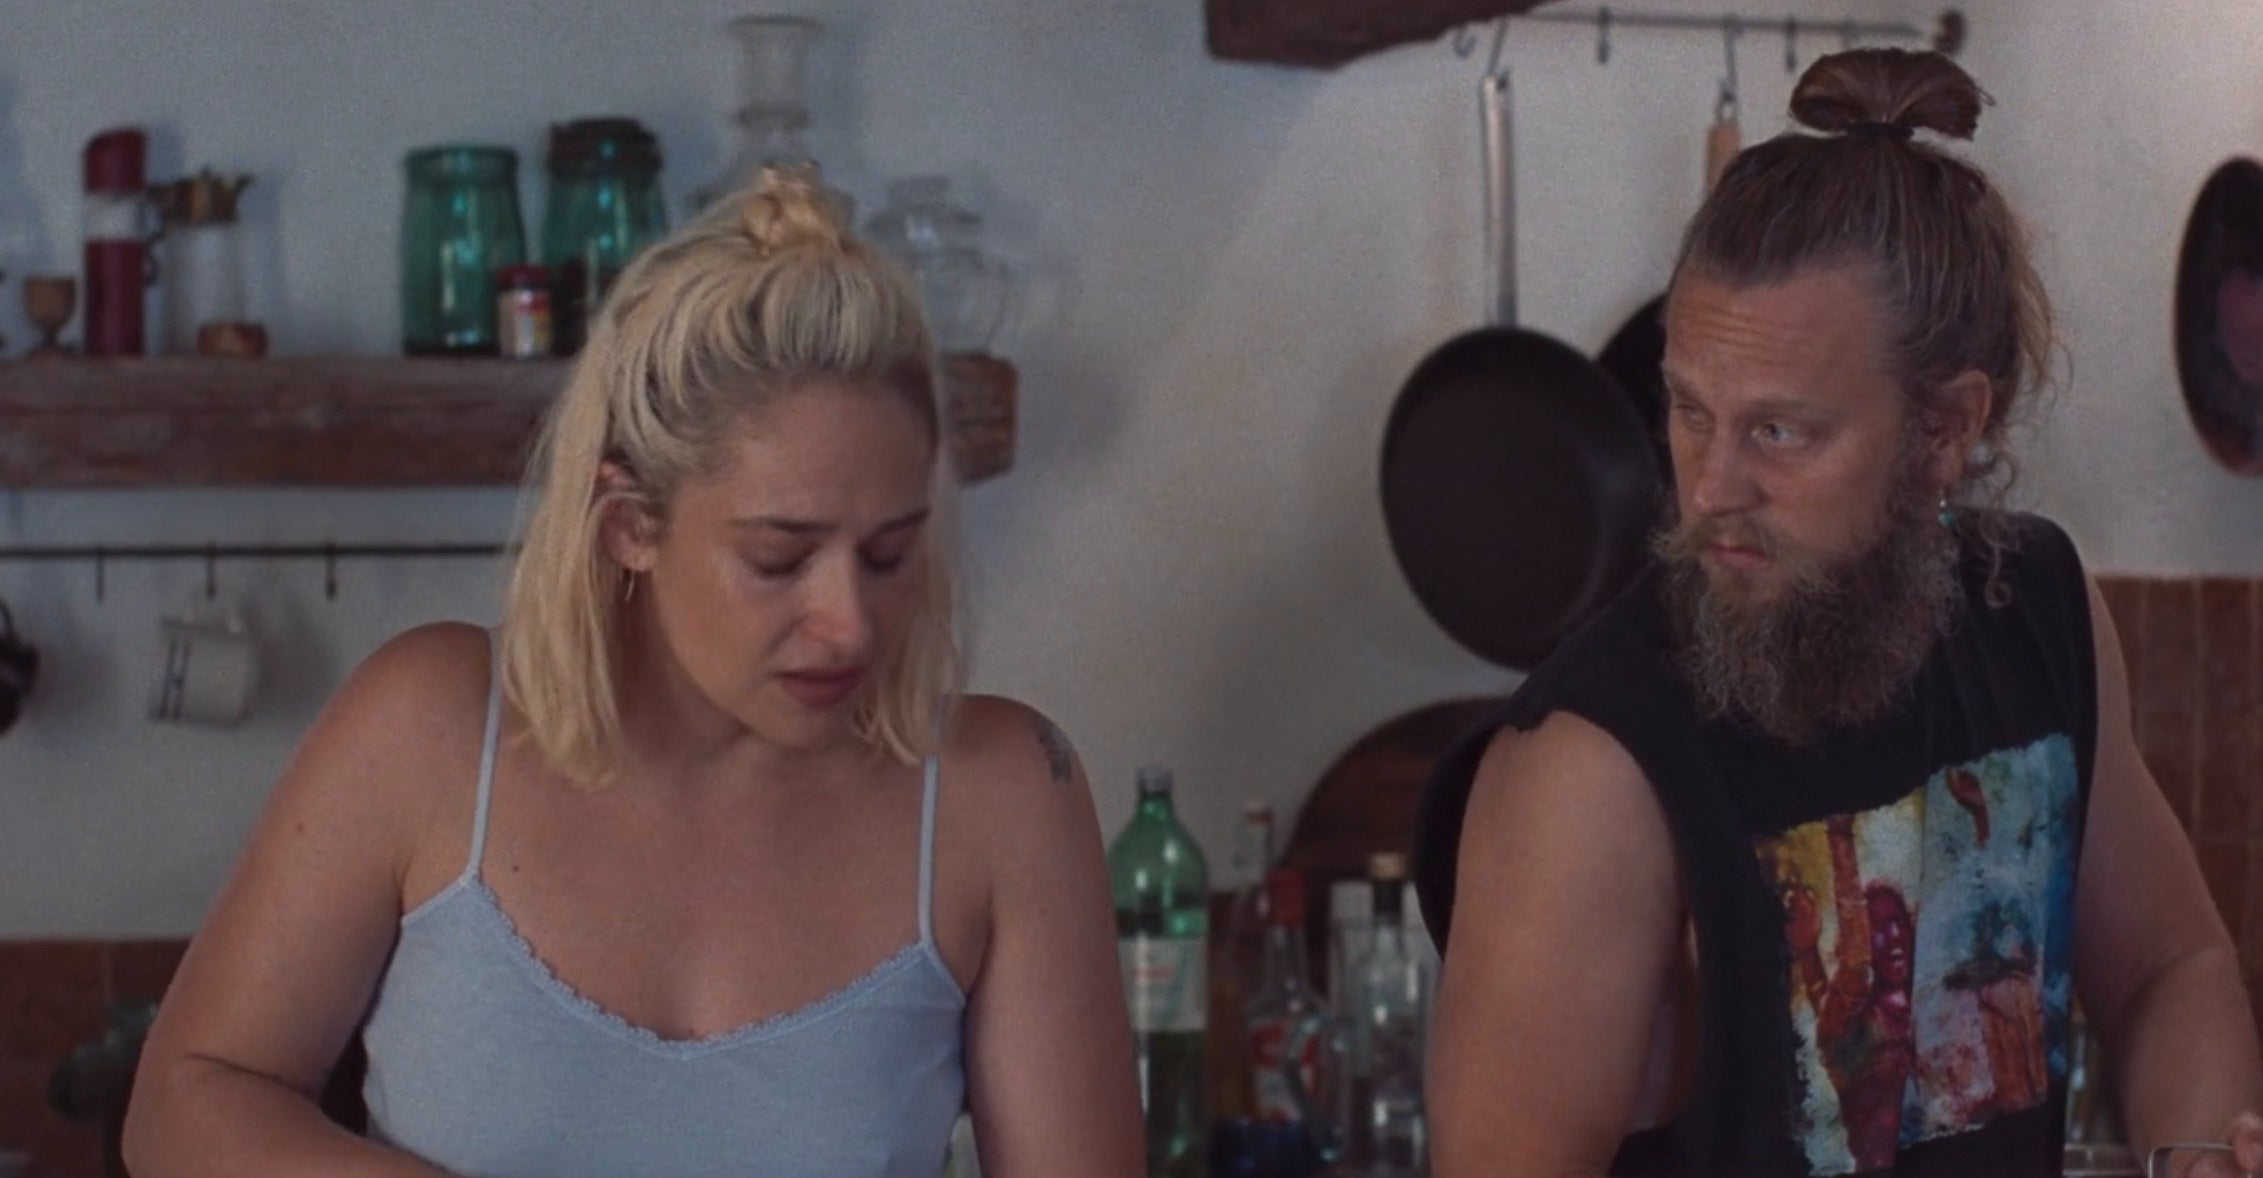 Jemima Kirke and Tadgh Murphy as Melissa and Derek in Conversations With Friends